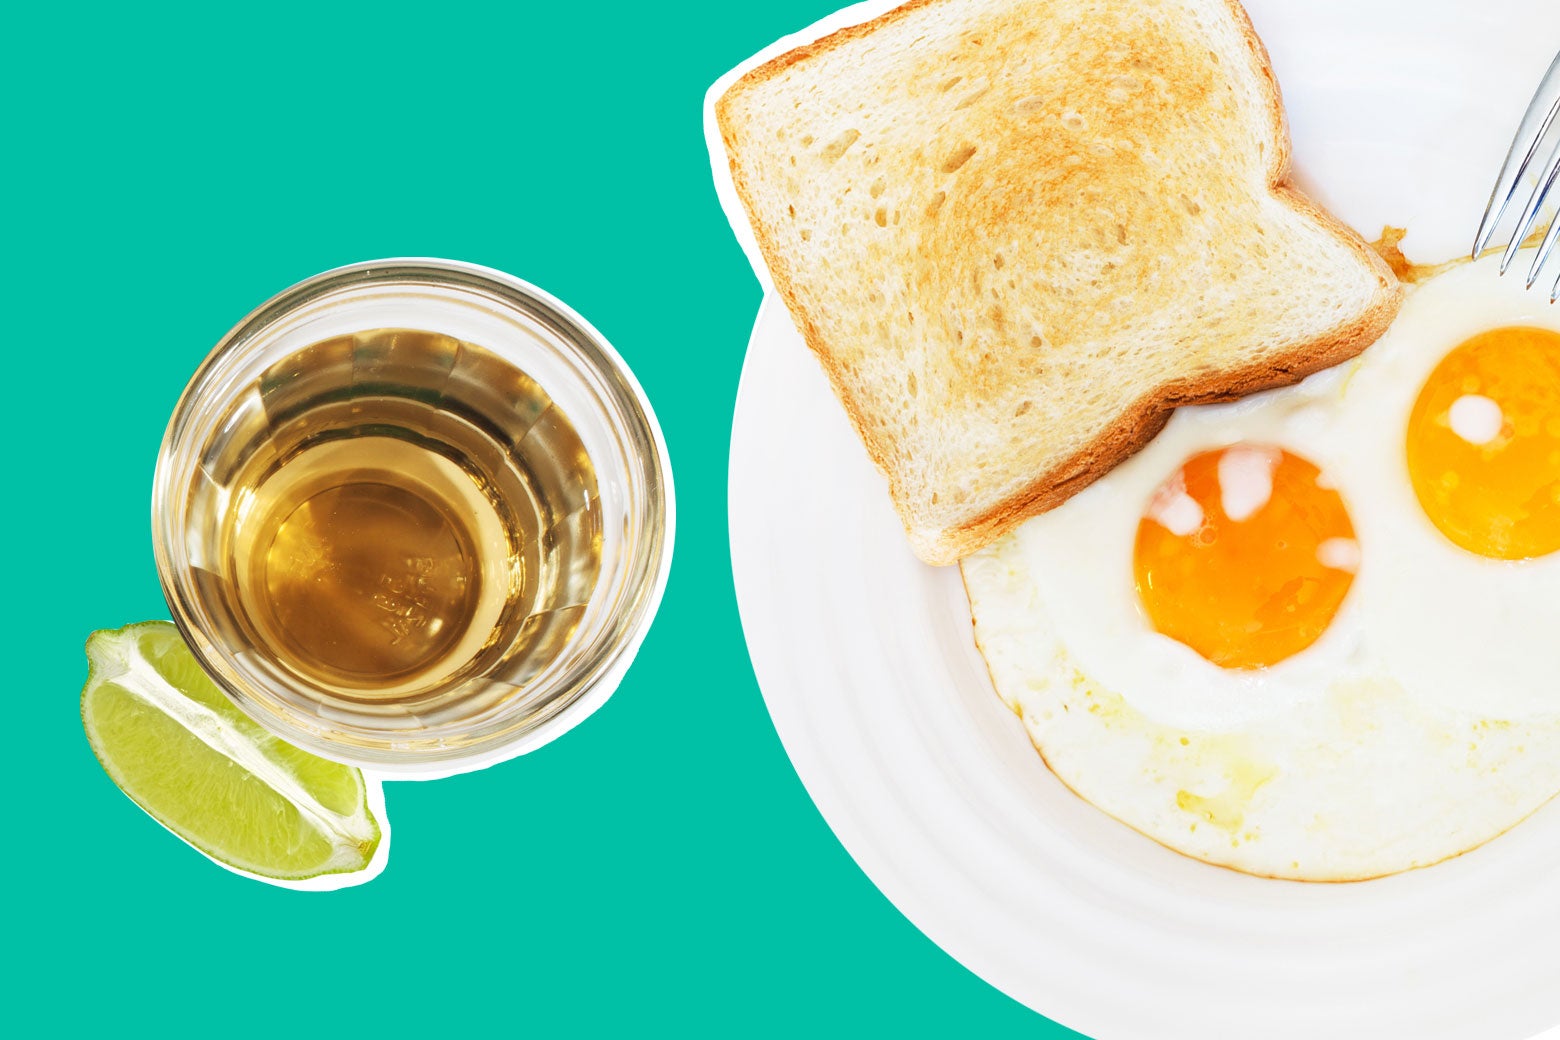 A shot of tequila alongside eggs and toast.